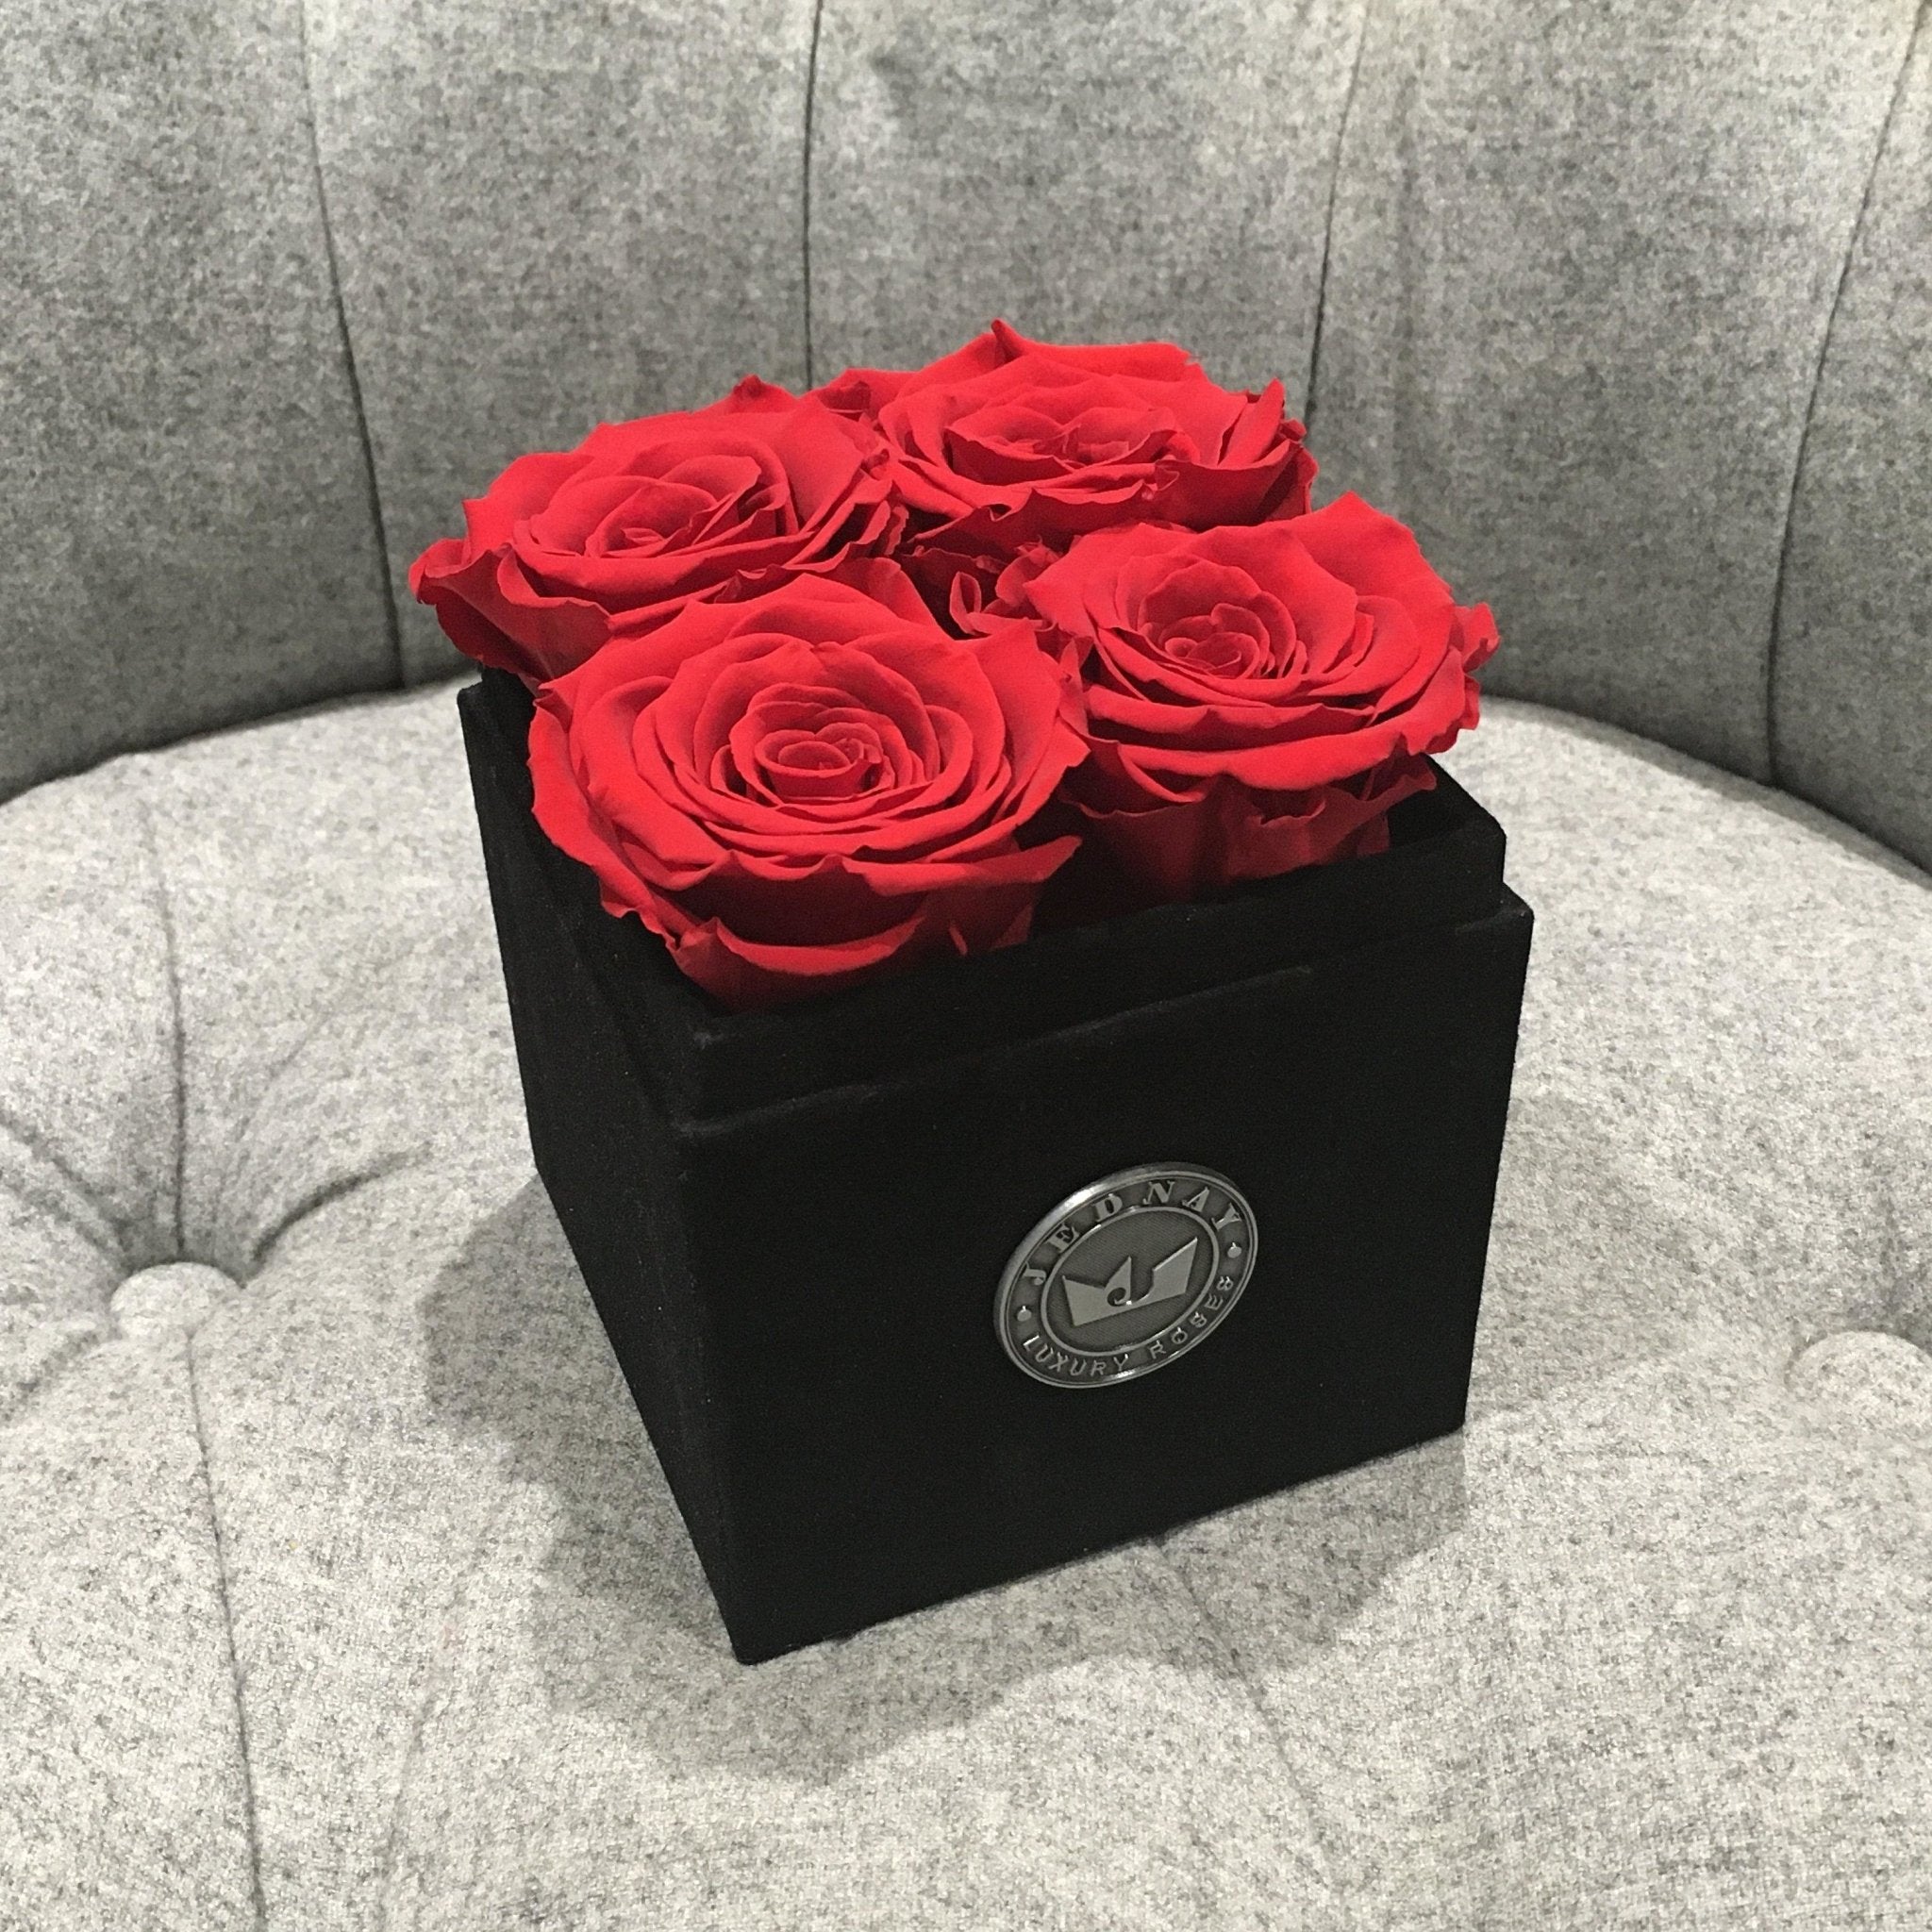 Celebrate An Early Valentine’s The Welsh Way - Jednay Roses